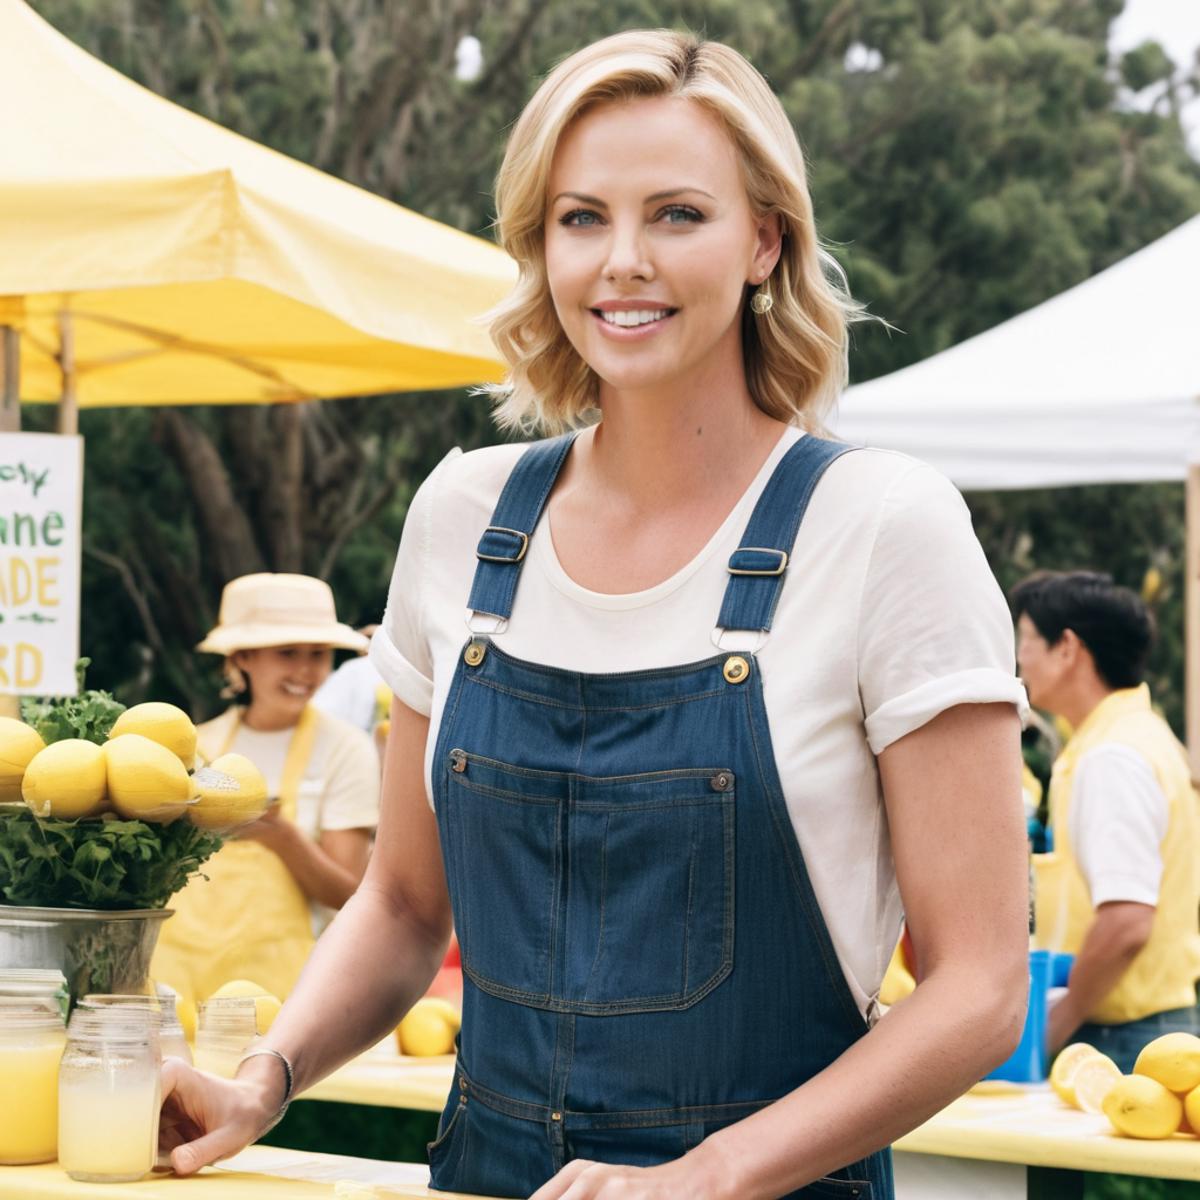 A woman standing in a lemon orchard wearing a blue overalls and a white shirt.